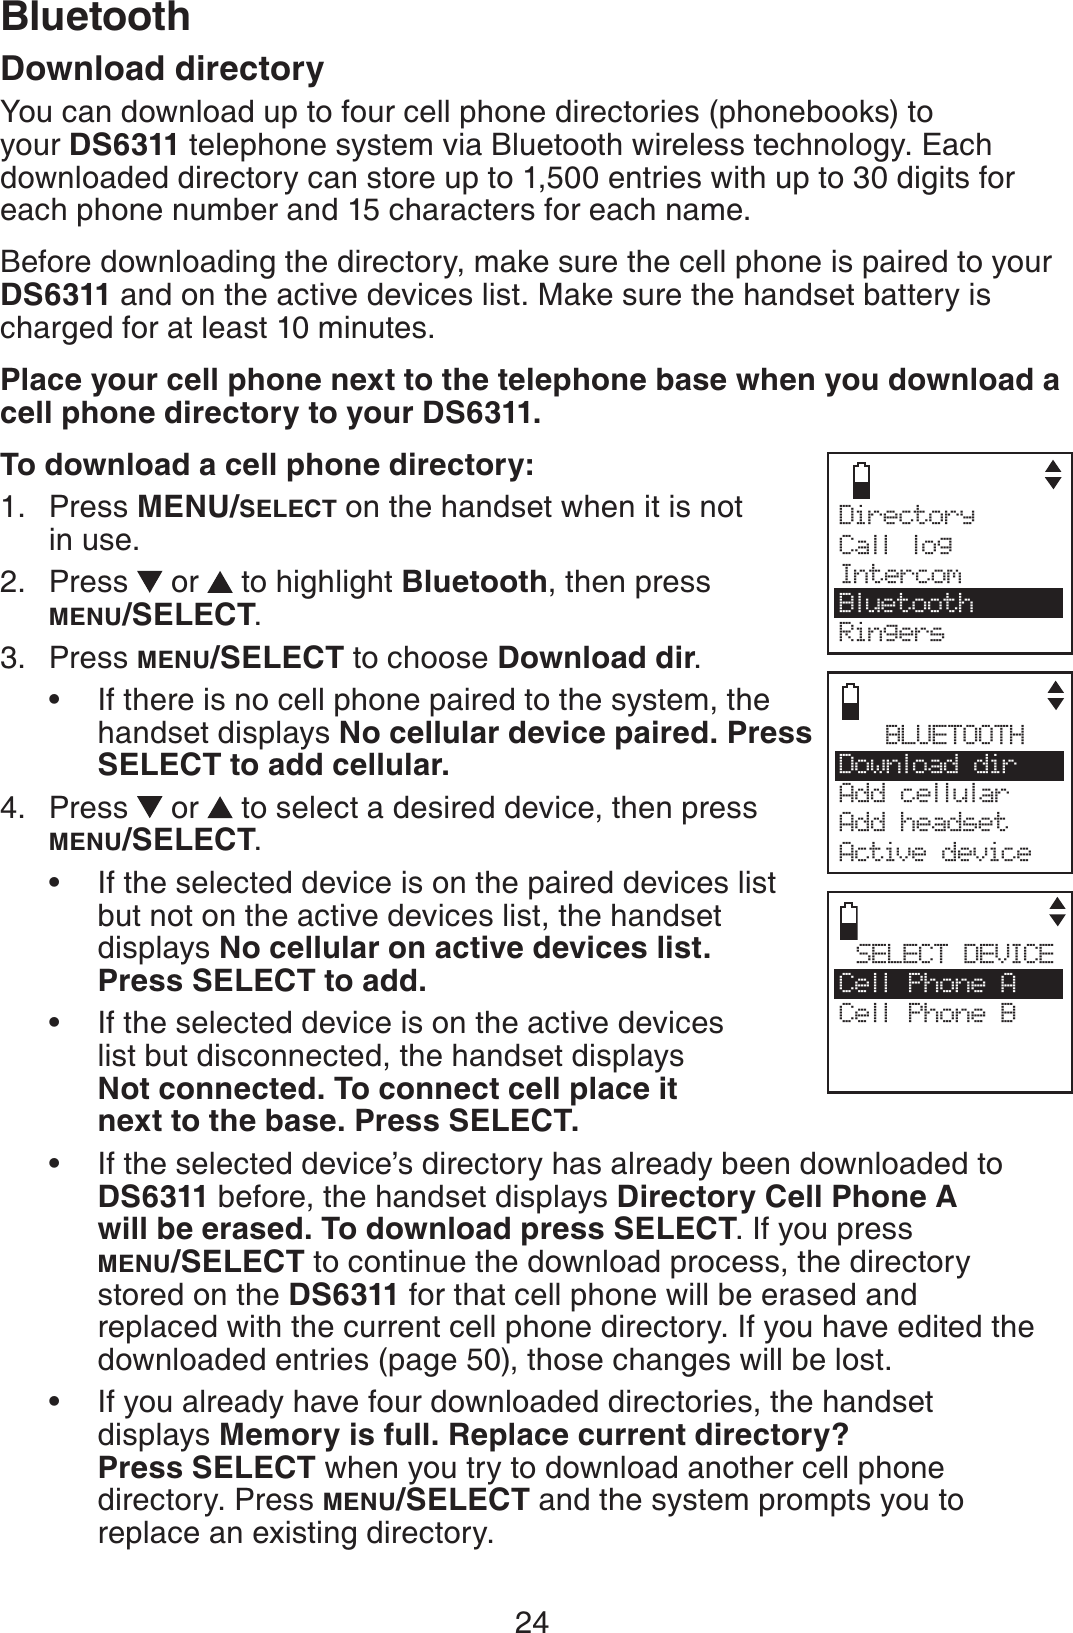 24BluetoothDownload directoryYou can download up to four cell phone directories (phonebooks) to your DS6311 telephone system via Bluetooth wireless technology. Each downloaded directory can store up to 1,500 entries with up to 30 digits for each phone number and 15 characters for each name.Before downloading the directory, make sure the cell phone is paired to your DS6311 and on the active devices list. Make sure the handset battery is charged for at least 10 minutes.Place your cell phone next to the telephone base when you download a cell phone directory to your DS6311.To download a cell phone directory:Press MENU/SELECT on the handset when it is not in use.Press   or  to highlight Bluetooth, then press MENU/SELECT.Press MENU/SELECT to choose Download dir.If there is no cell phone paired to the system, the handset displays No cellular device paired. Press SELECT to add cellular.Press   or  to select a desired device, then press MENU/SELECT.If the selected device is on the paired devices list but not on the active devices list, the handset    displays No cellular on active devices list. Press SELECT to add.If the selected device is on the active devices   list but disconnected, the handset displays Not connected. To connect cell place it next to the base. Press SELECT.If the selected device’s directory has already been downloaded to DS6311 before, the handset displays Directory Cell Phone A    will be erased. To download press SELECT. If you press MENU/SELECT to continue the download process, the directory   stored on the DS6311 for that cell phone will be erased and    replaced with the current cell phone directory. If you have edited the downloaded entries (page 50), those changes will be lost.If you already have four downloaded directories, the handset    displays Memory is full. Replace current directory? Press SELECT when you try to download another cell phone    directory. Press MENU/SELECT and the system prompts you to    replace an existing directory.1.2.3.•4.••••BLUETOOTHDownload dir    Add cellular Add headsetActive devicesSELECT DEVICECell Phone ACell Phone BCDirectory Call logIntercomBluetoothRingers